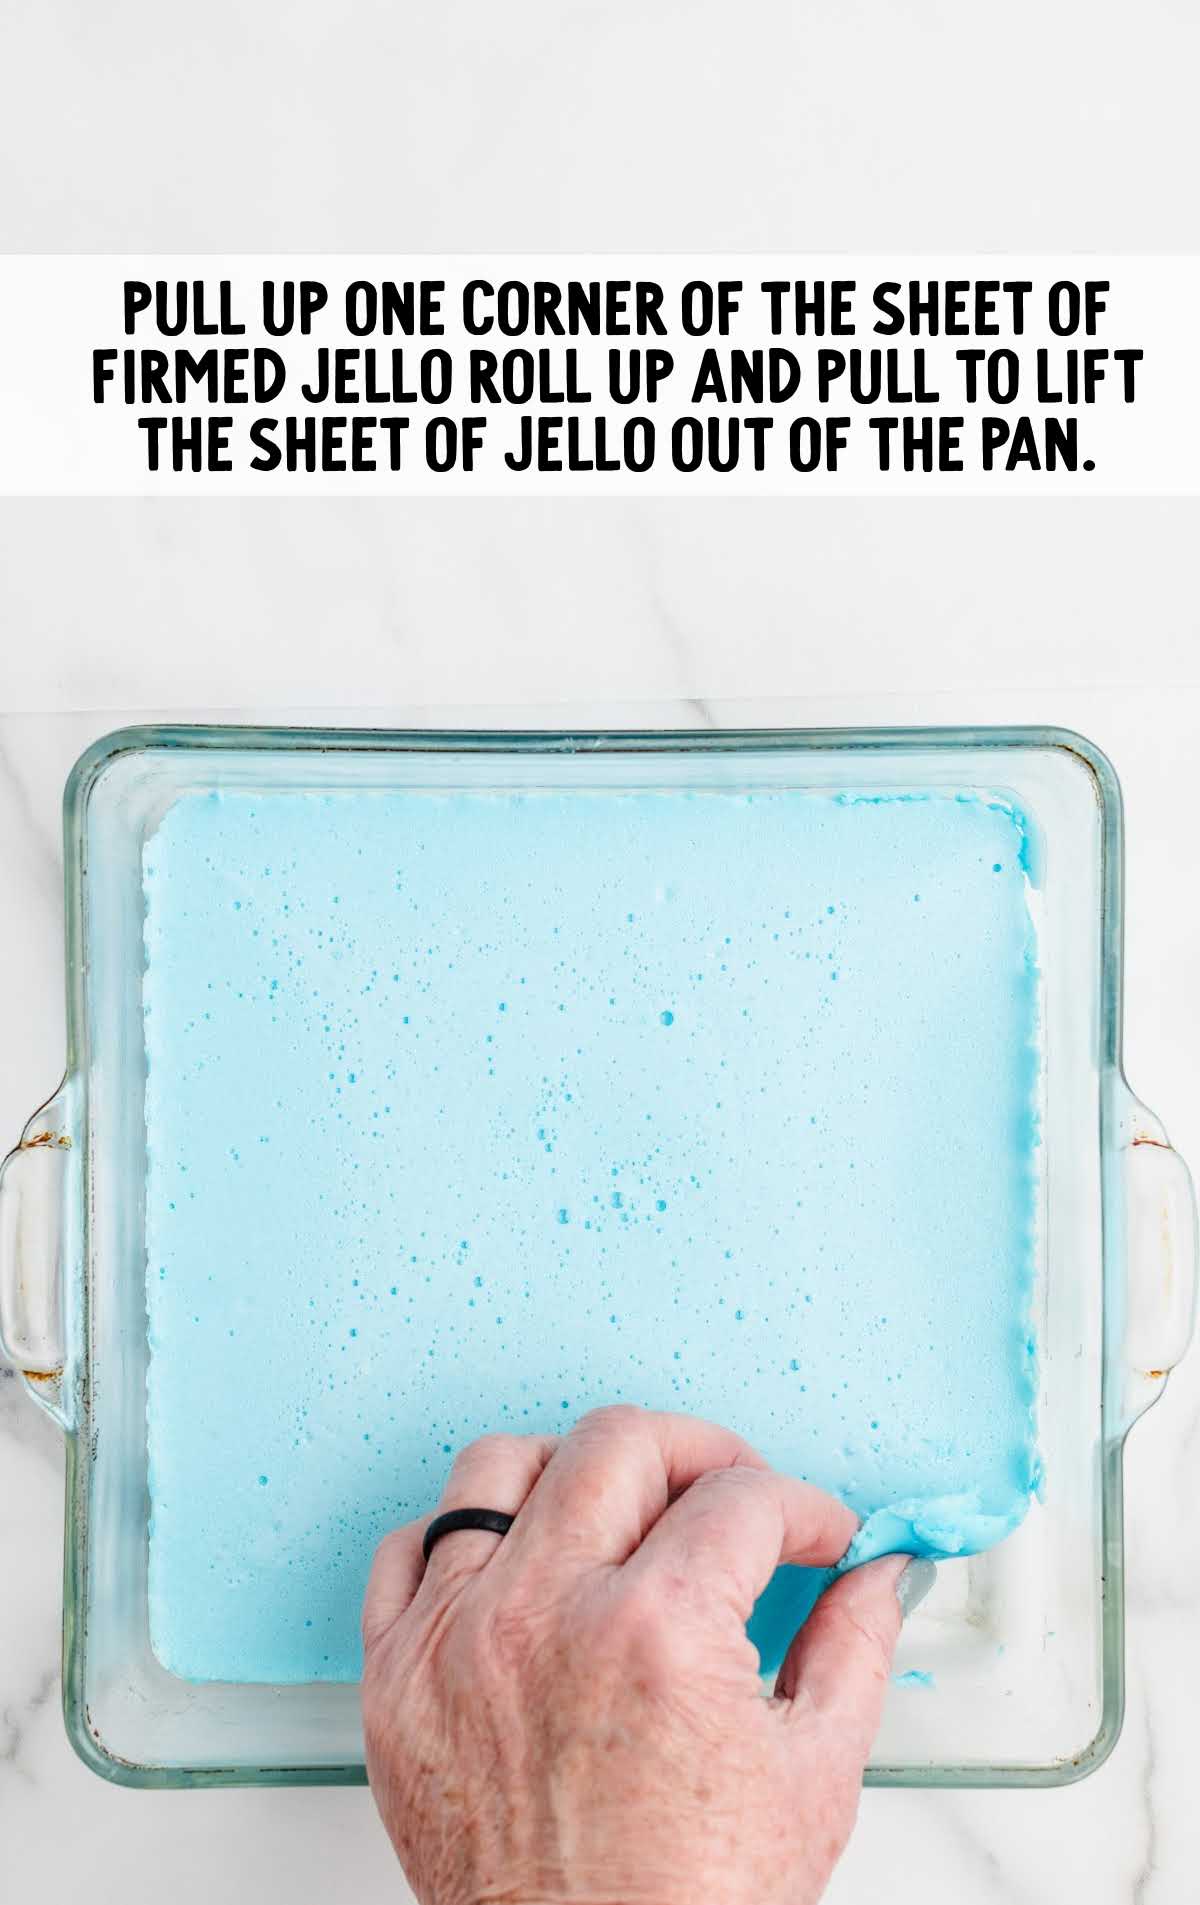 jello sheet being lifted from the pan